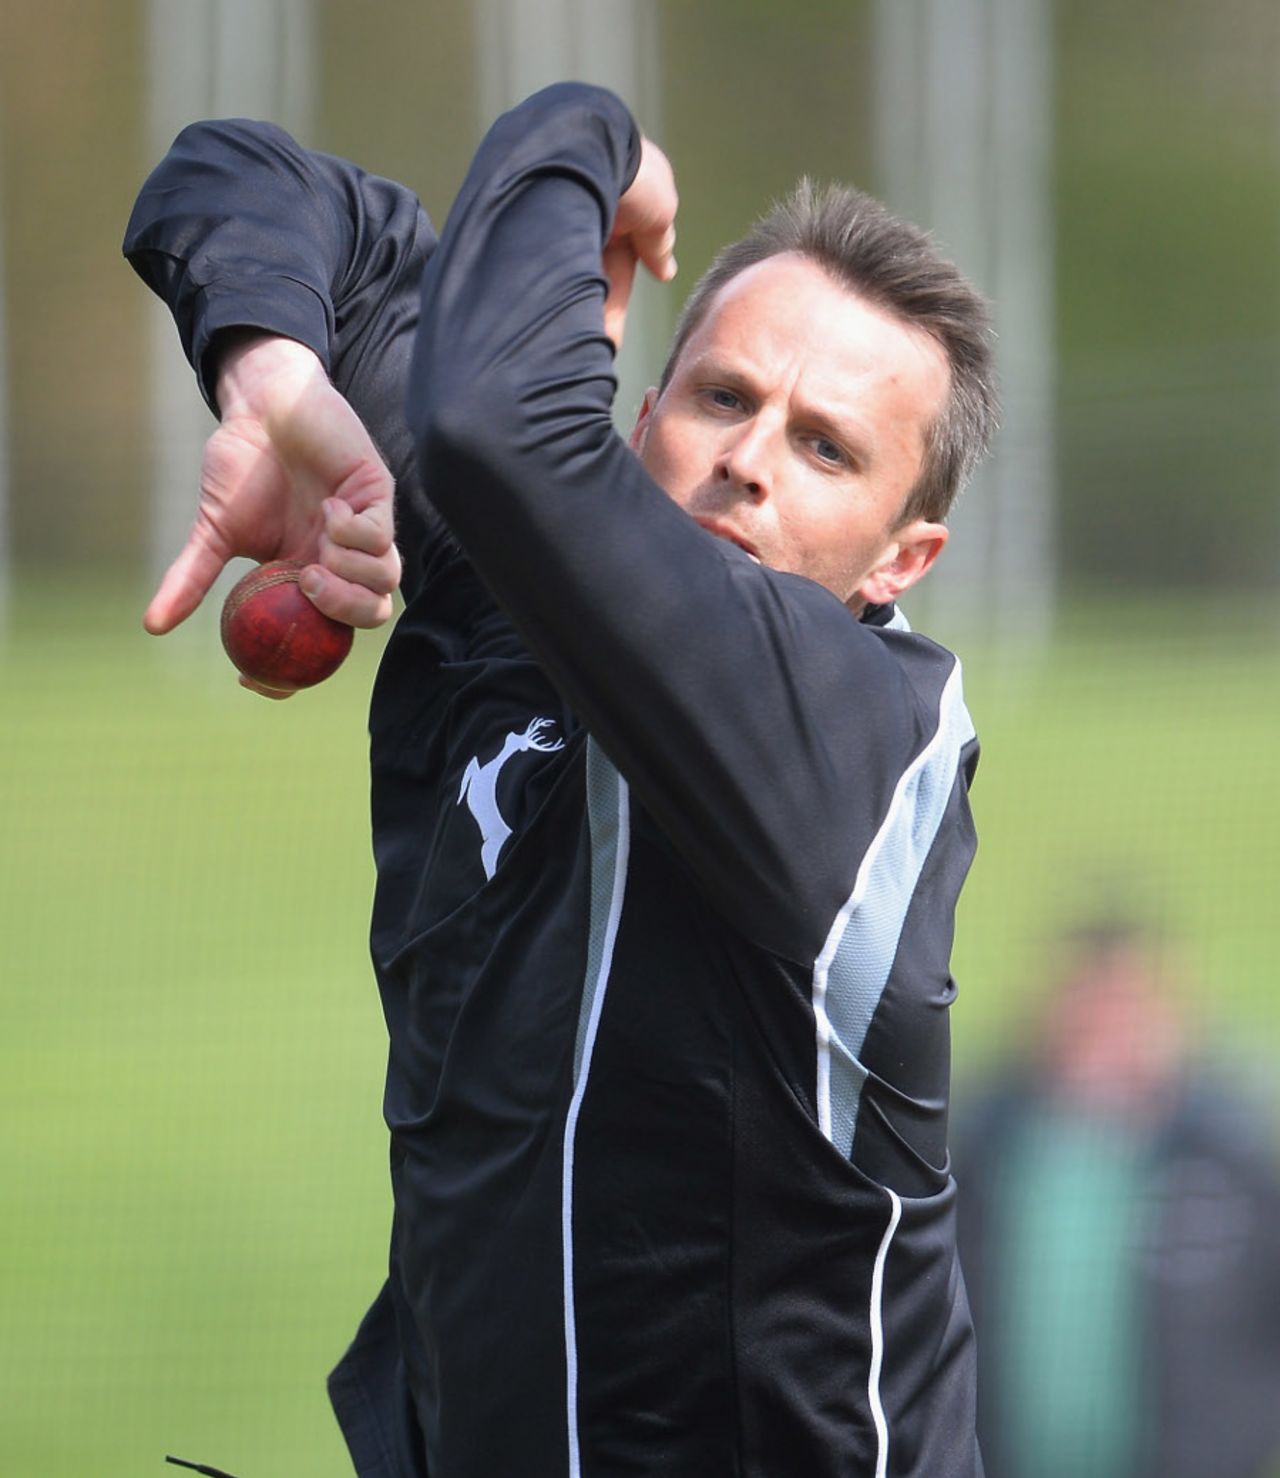 Graeme Swann tests his elbow in the nets, Derbyshire v Nottinghamshire, County Championship, Division One, Derby, 2nd day, April 25, 2013